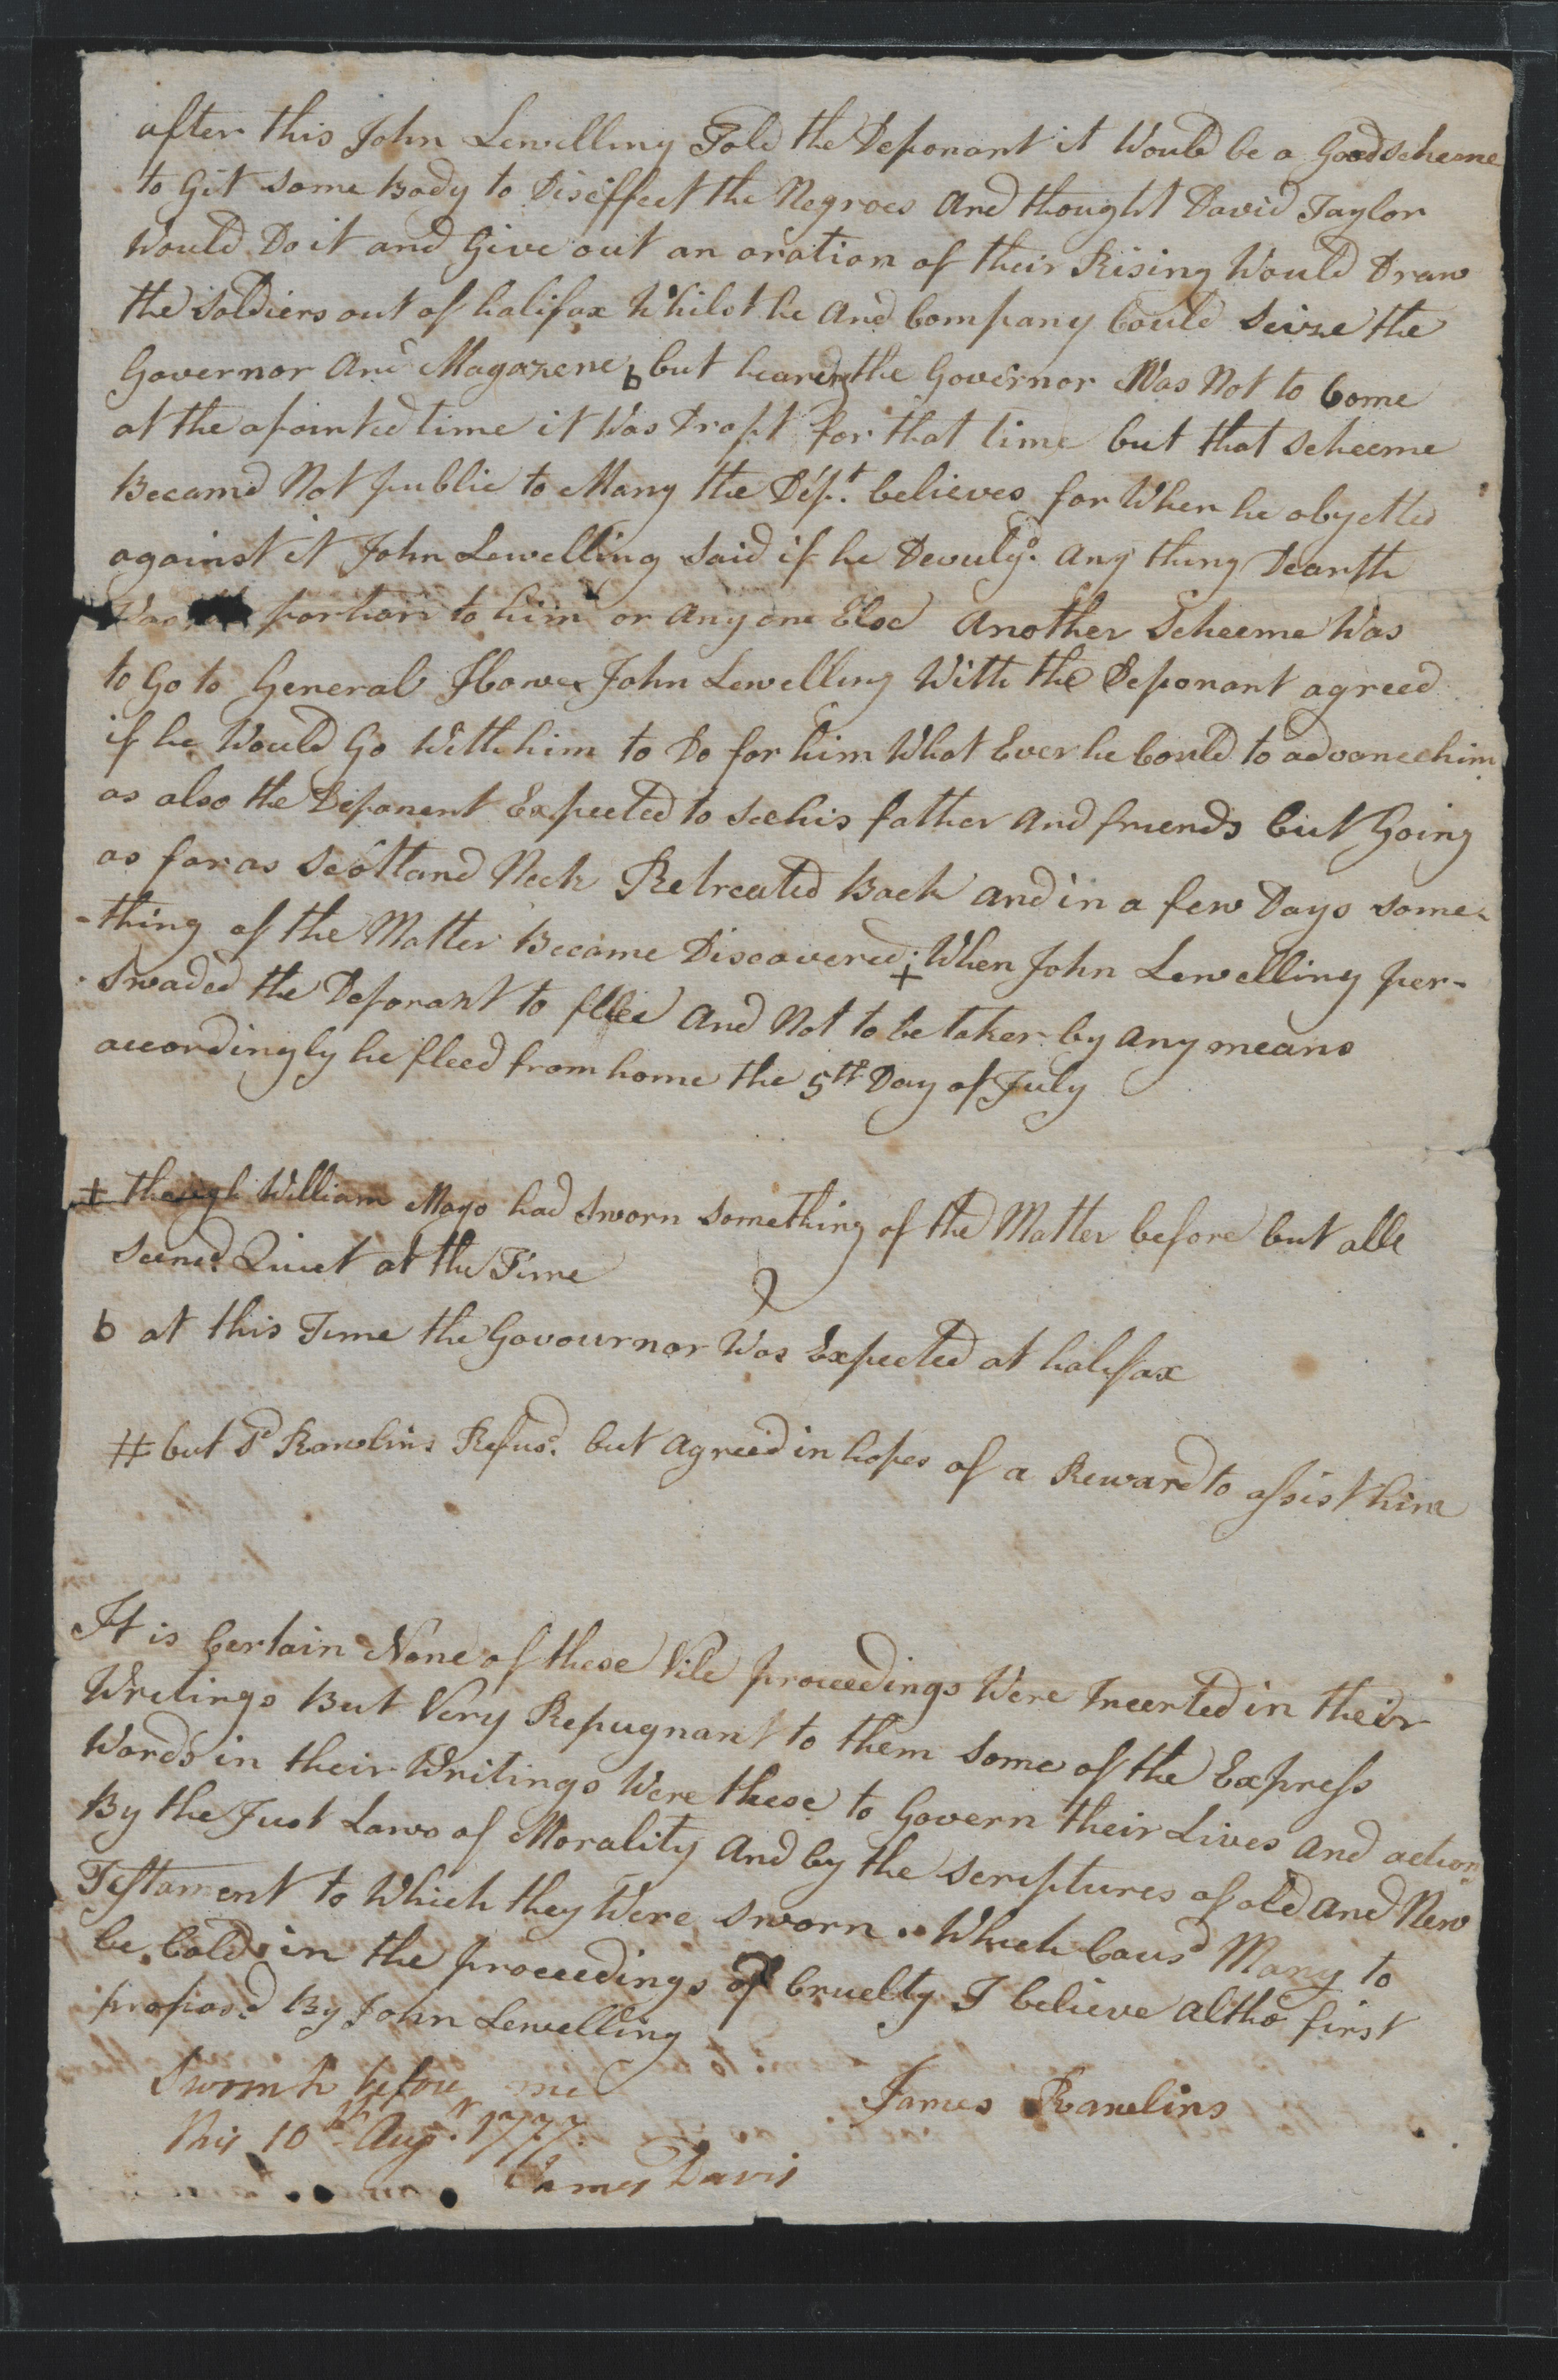 Deposition of James Rawlings, 10 August 1777, page 2